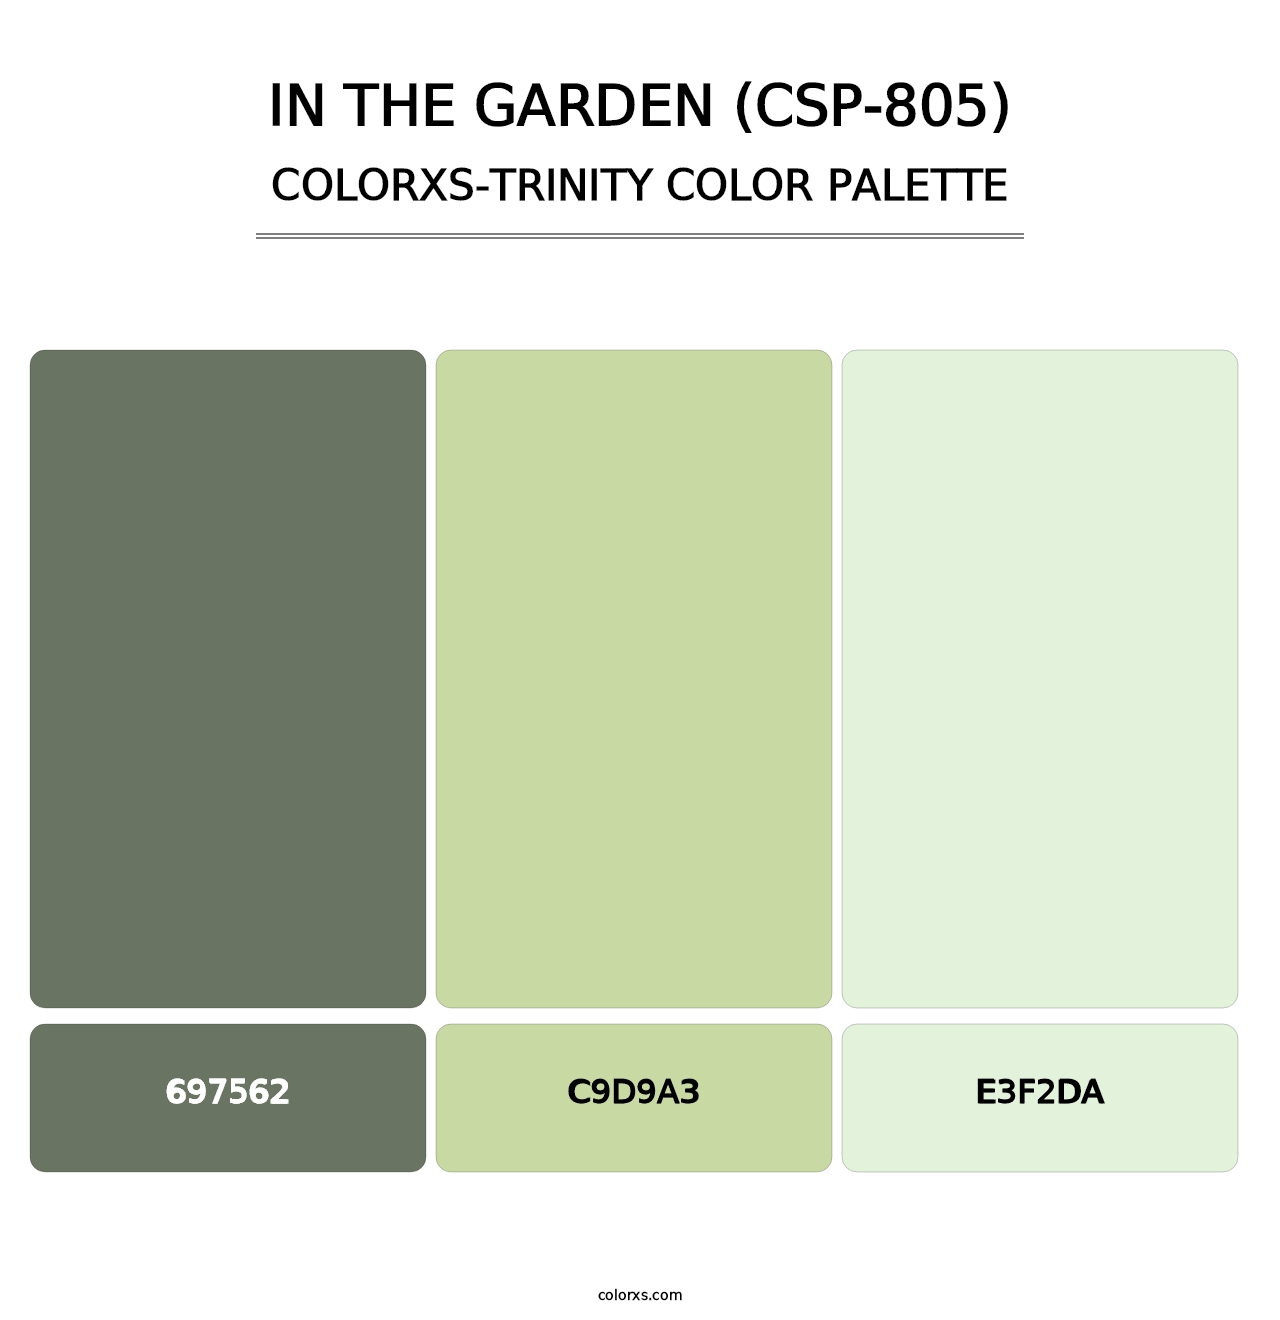 In the Garden (CSP-805) - Colorxs Trinity Palette